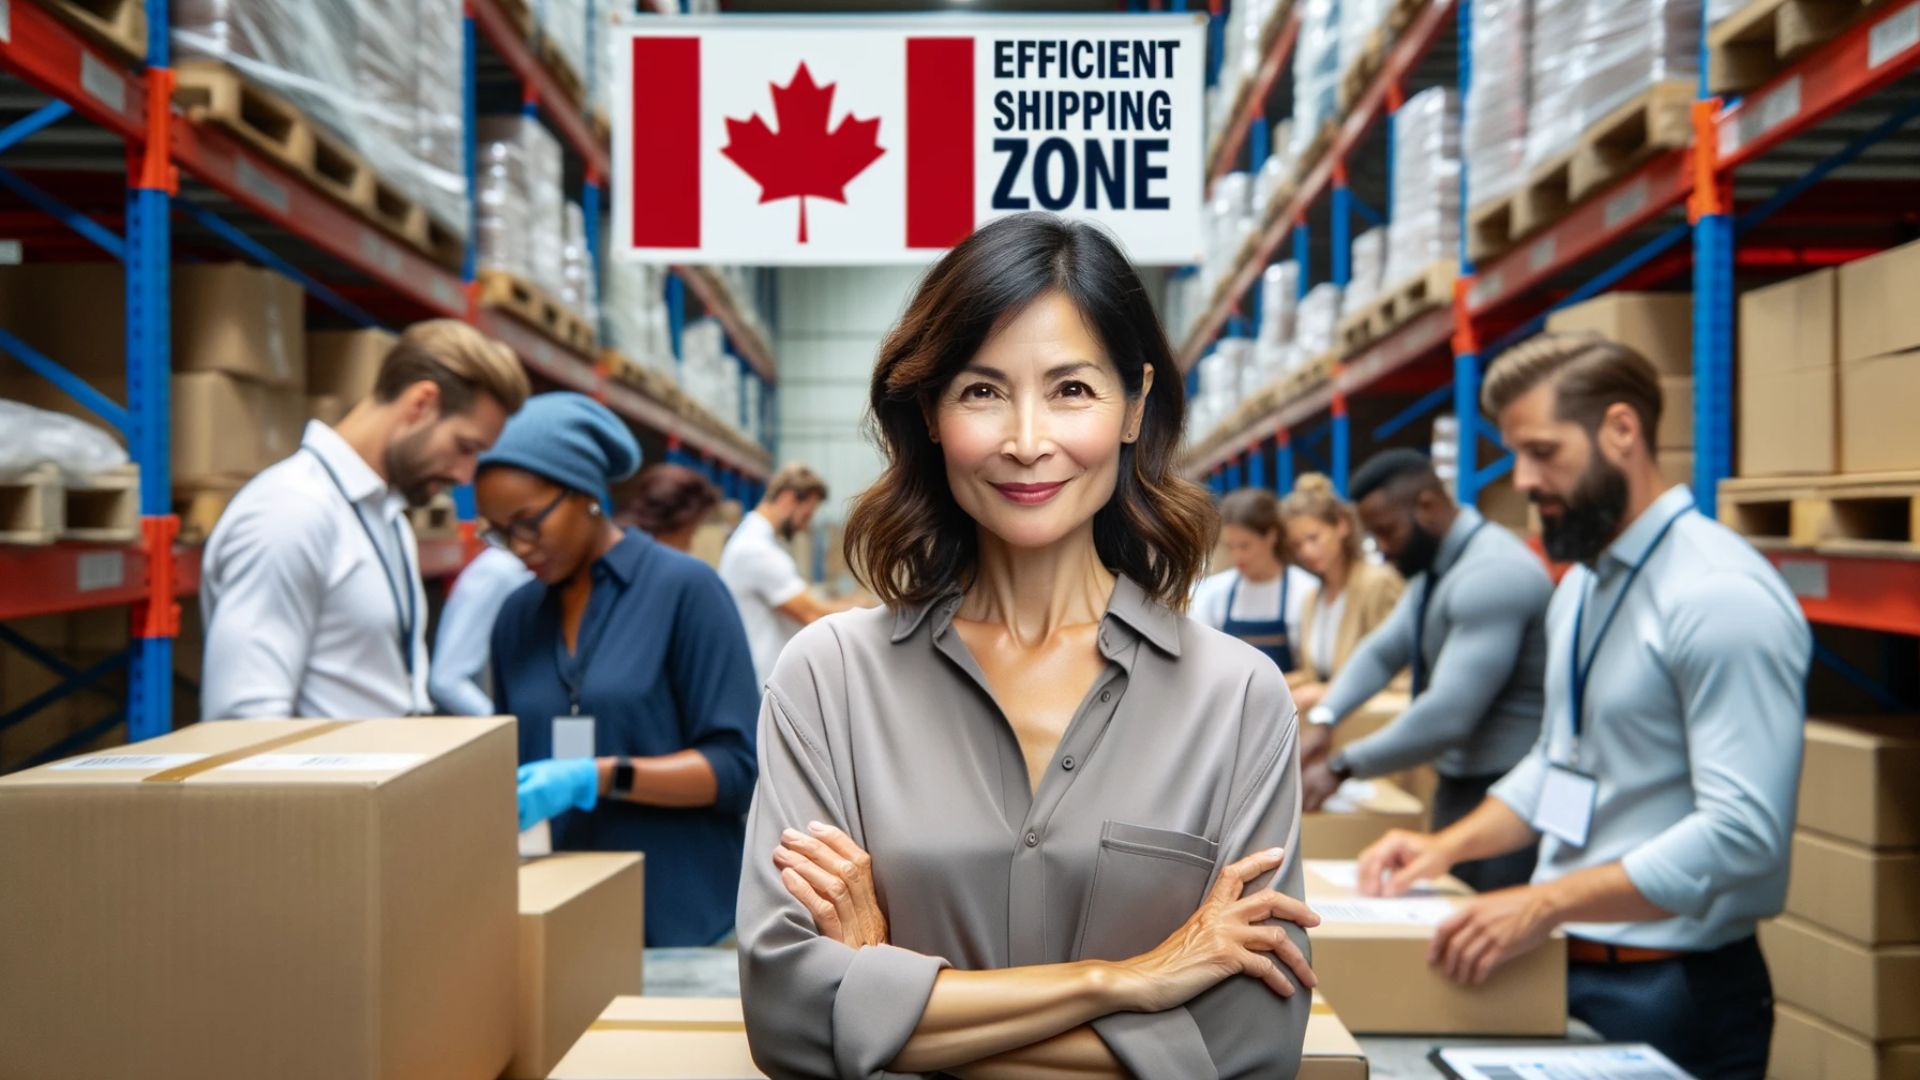 Canadian business owner in a warehouse with busy packers and an 'Efficient Shipping' sign.